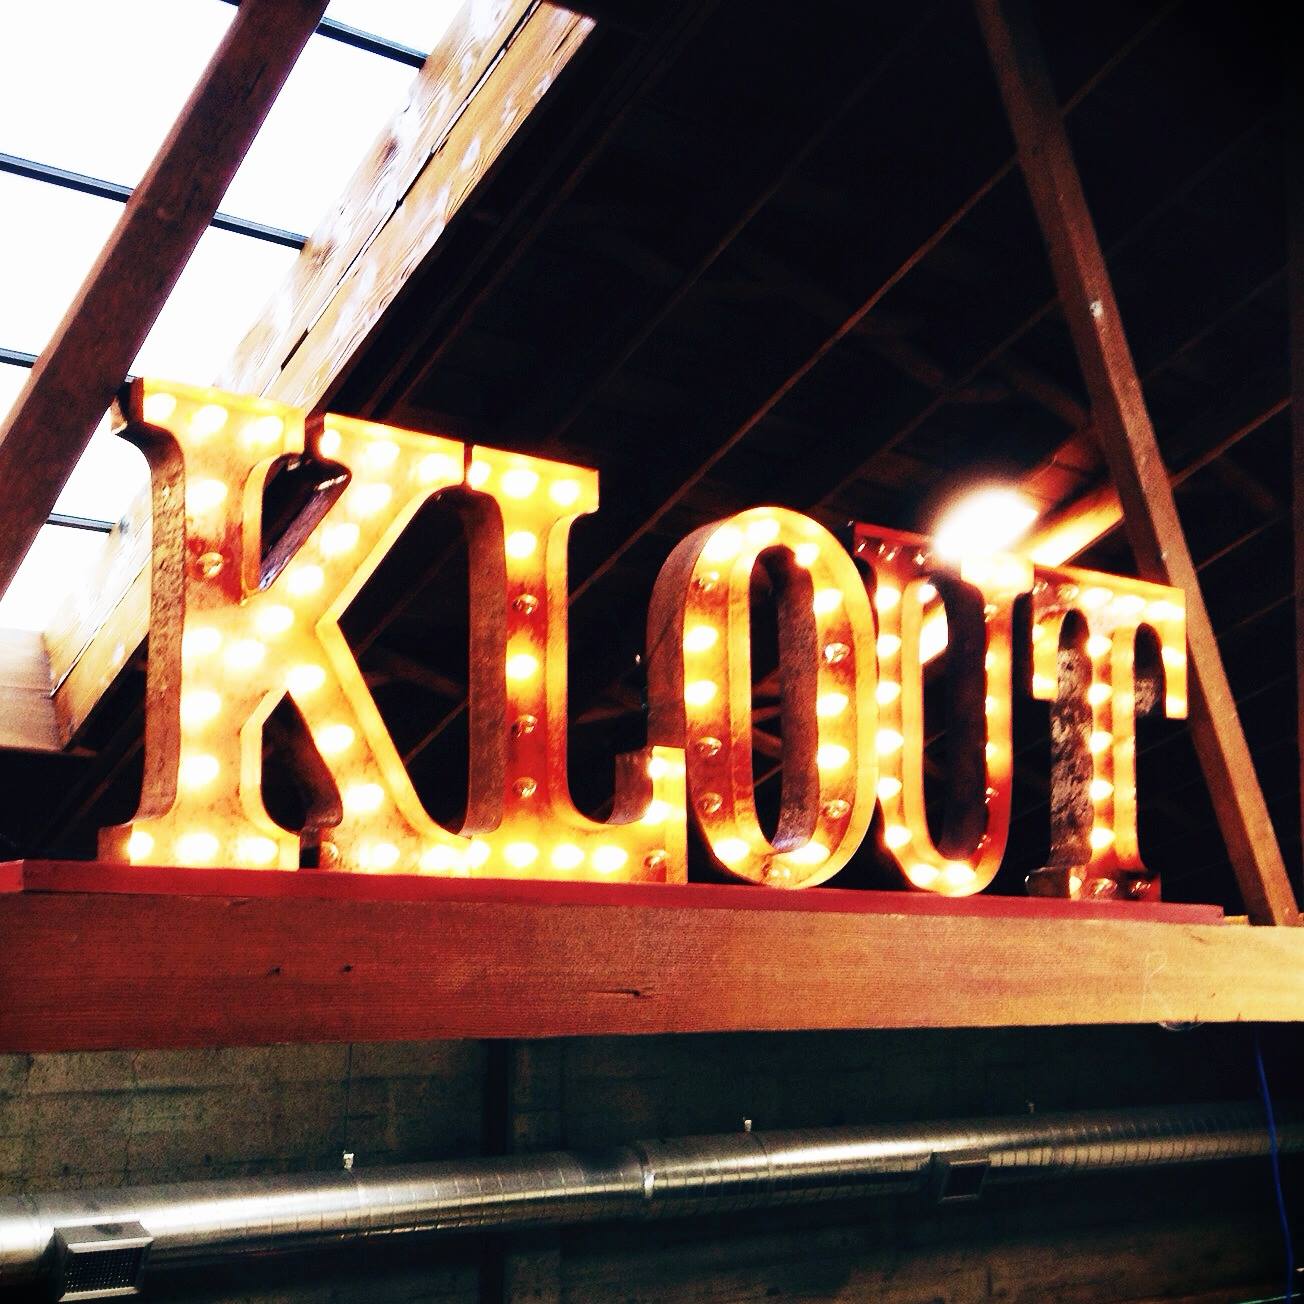 Klout in lights